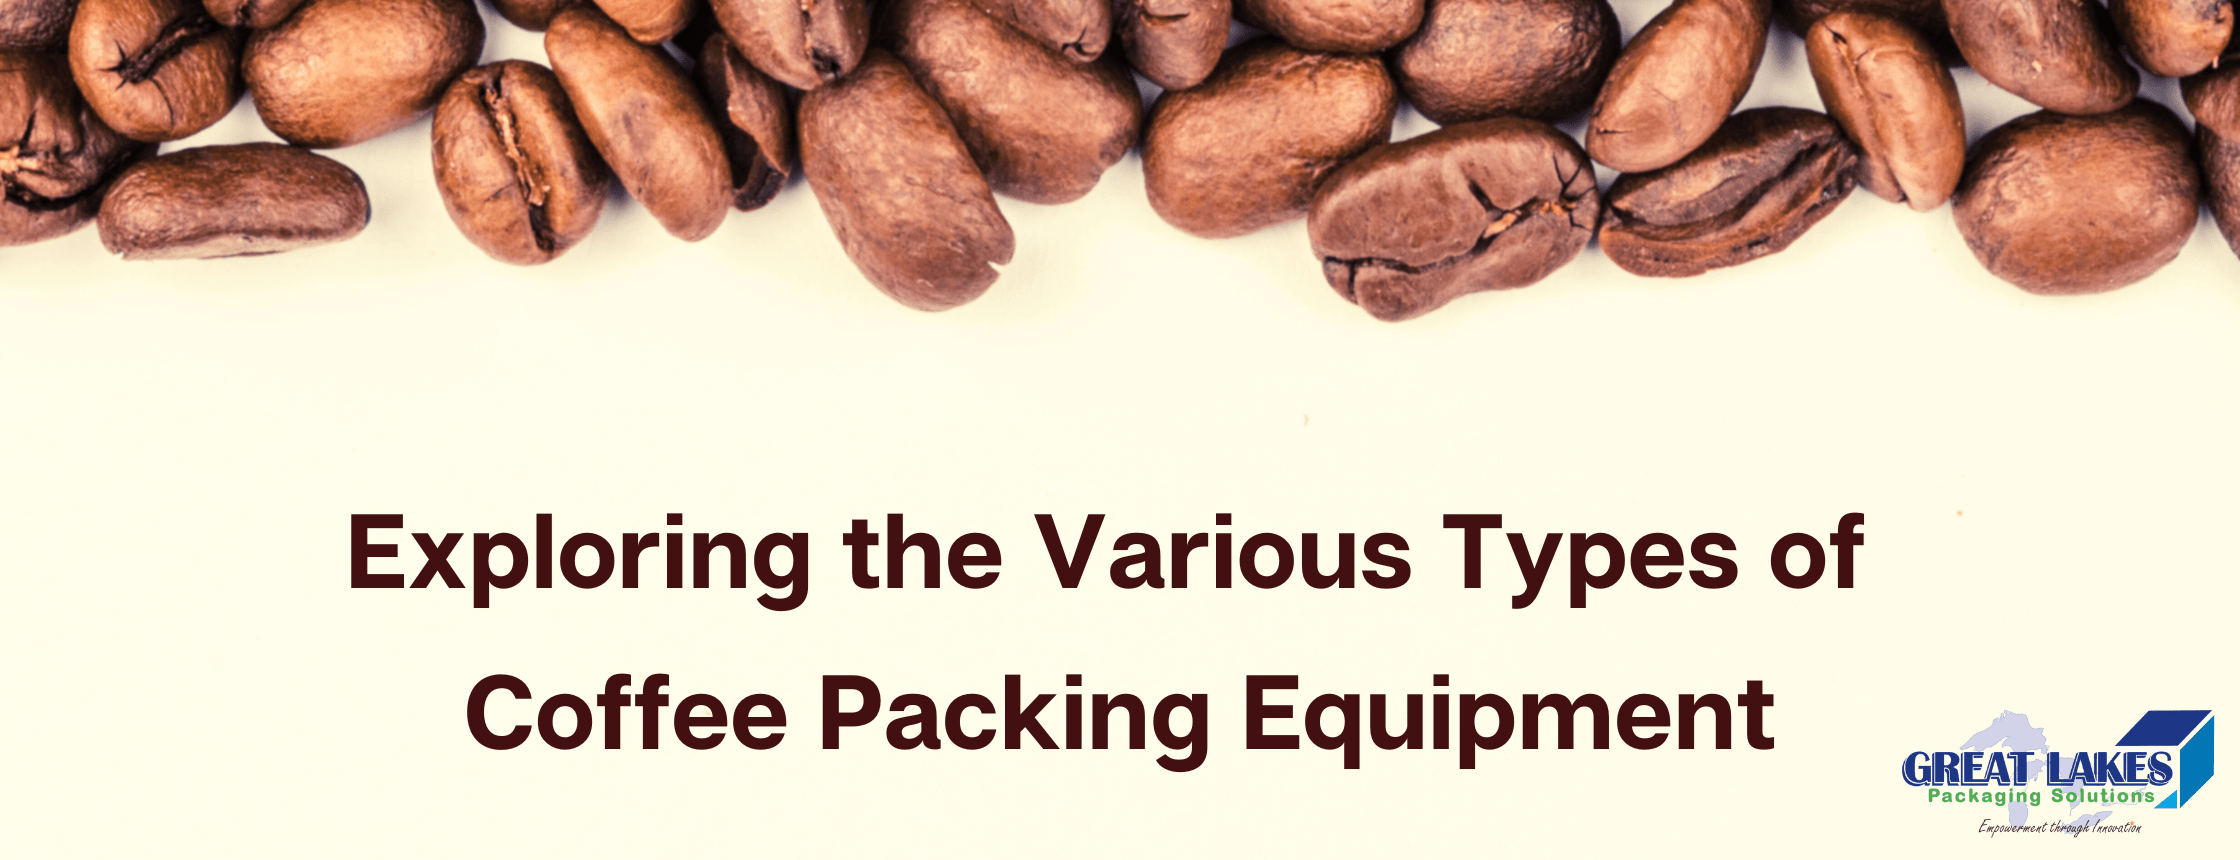 Exploring the Various Types of Coffee Packing Equipment